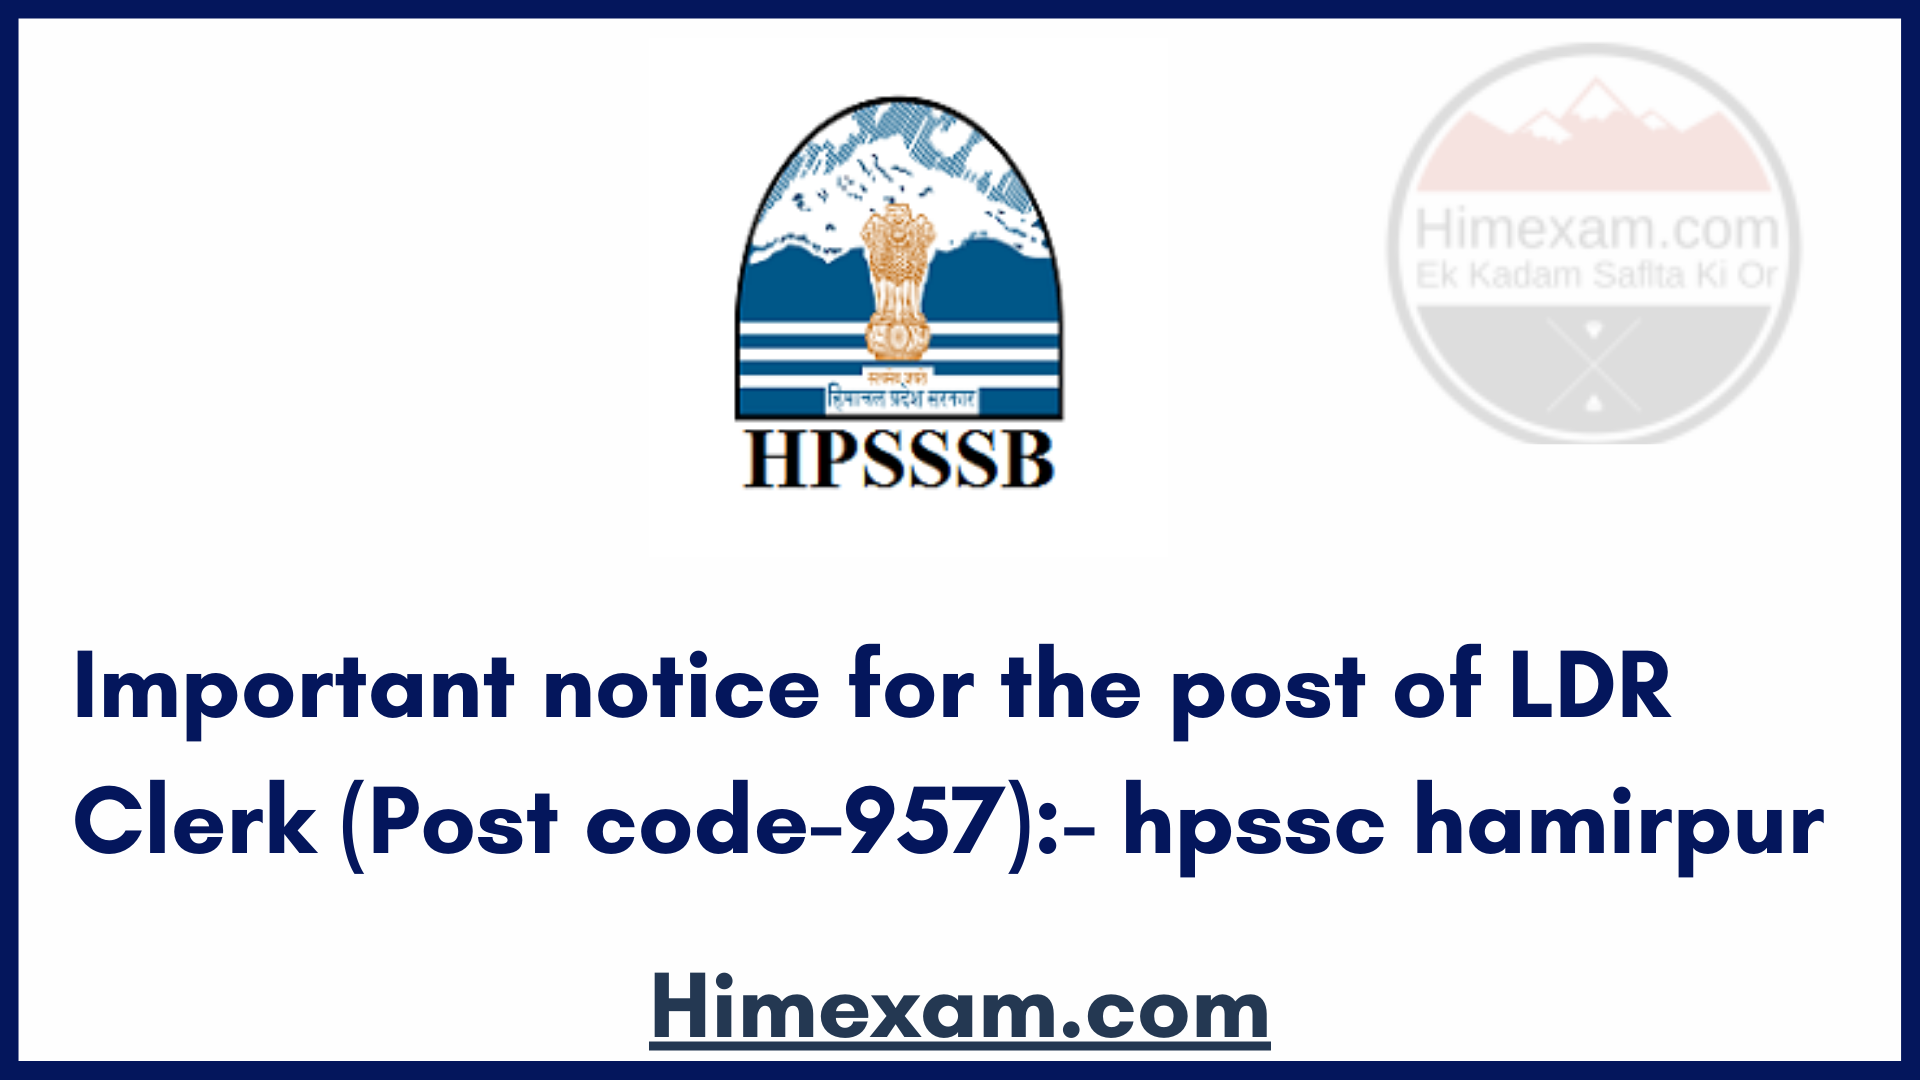 Important notice for the post of LDR Clerk (Post code-957):- hpssc hamirpur